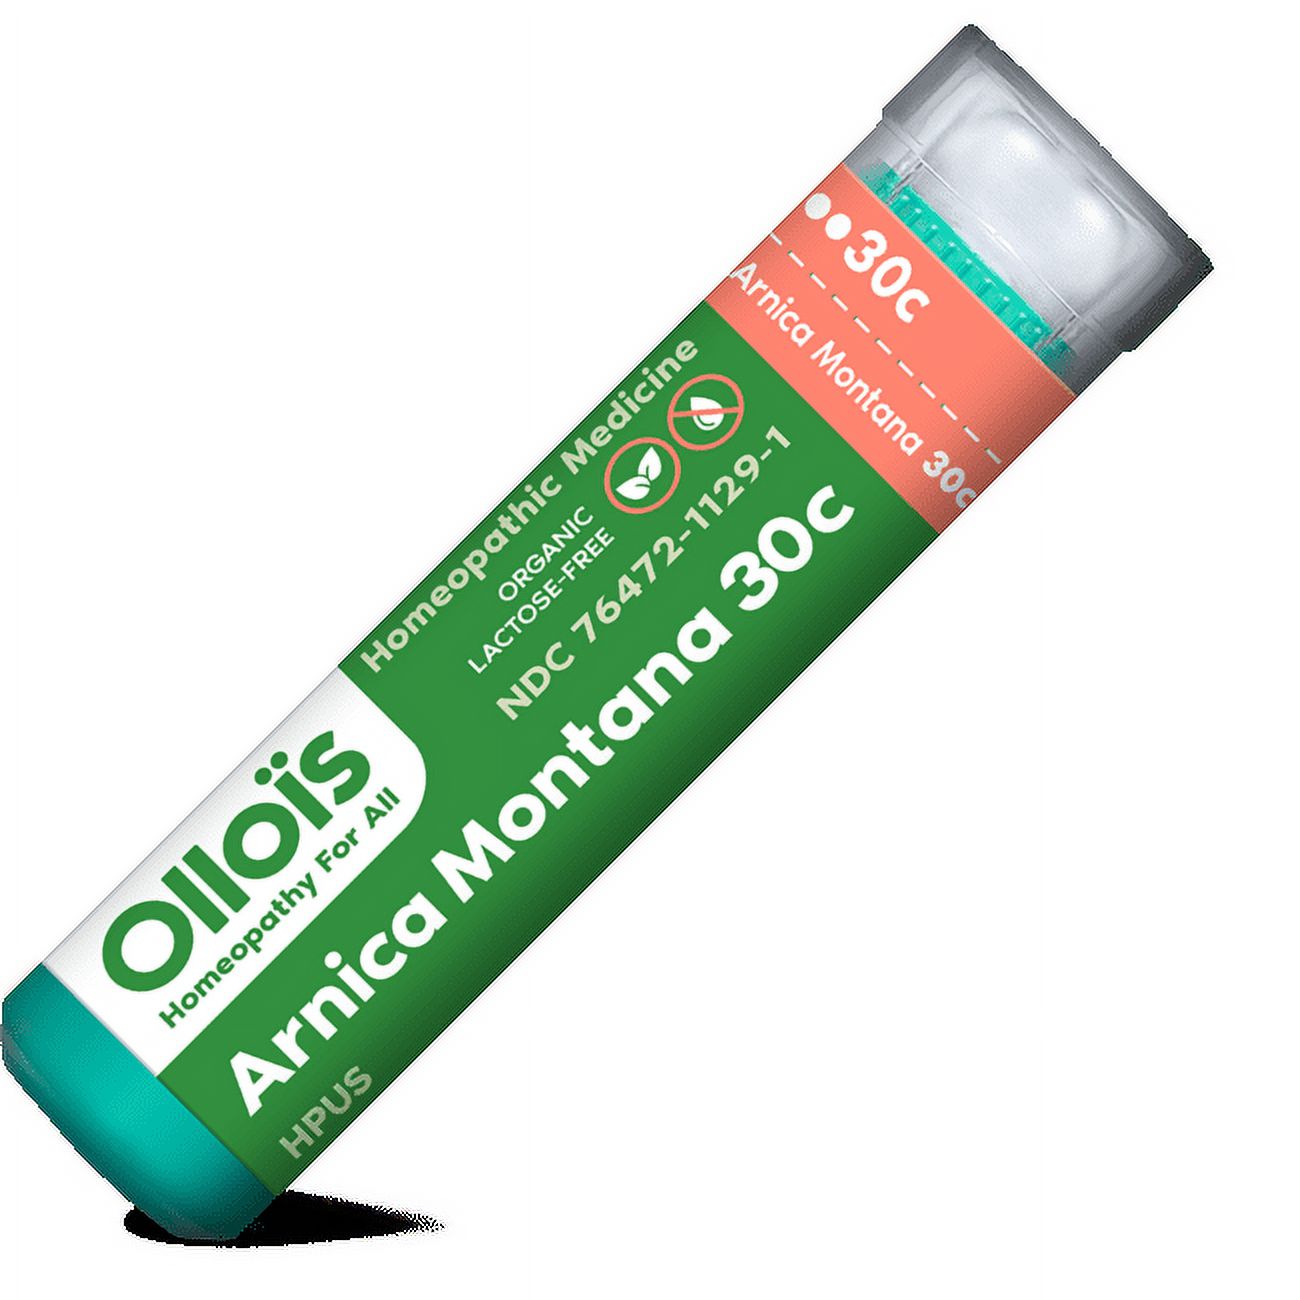 Ollois Homeopathic Arnica Montana 30c 80 Pellets - image 1 of 2